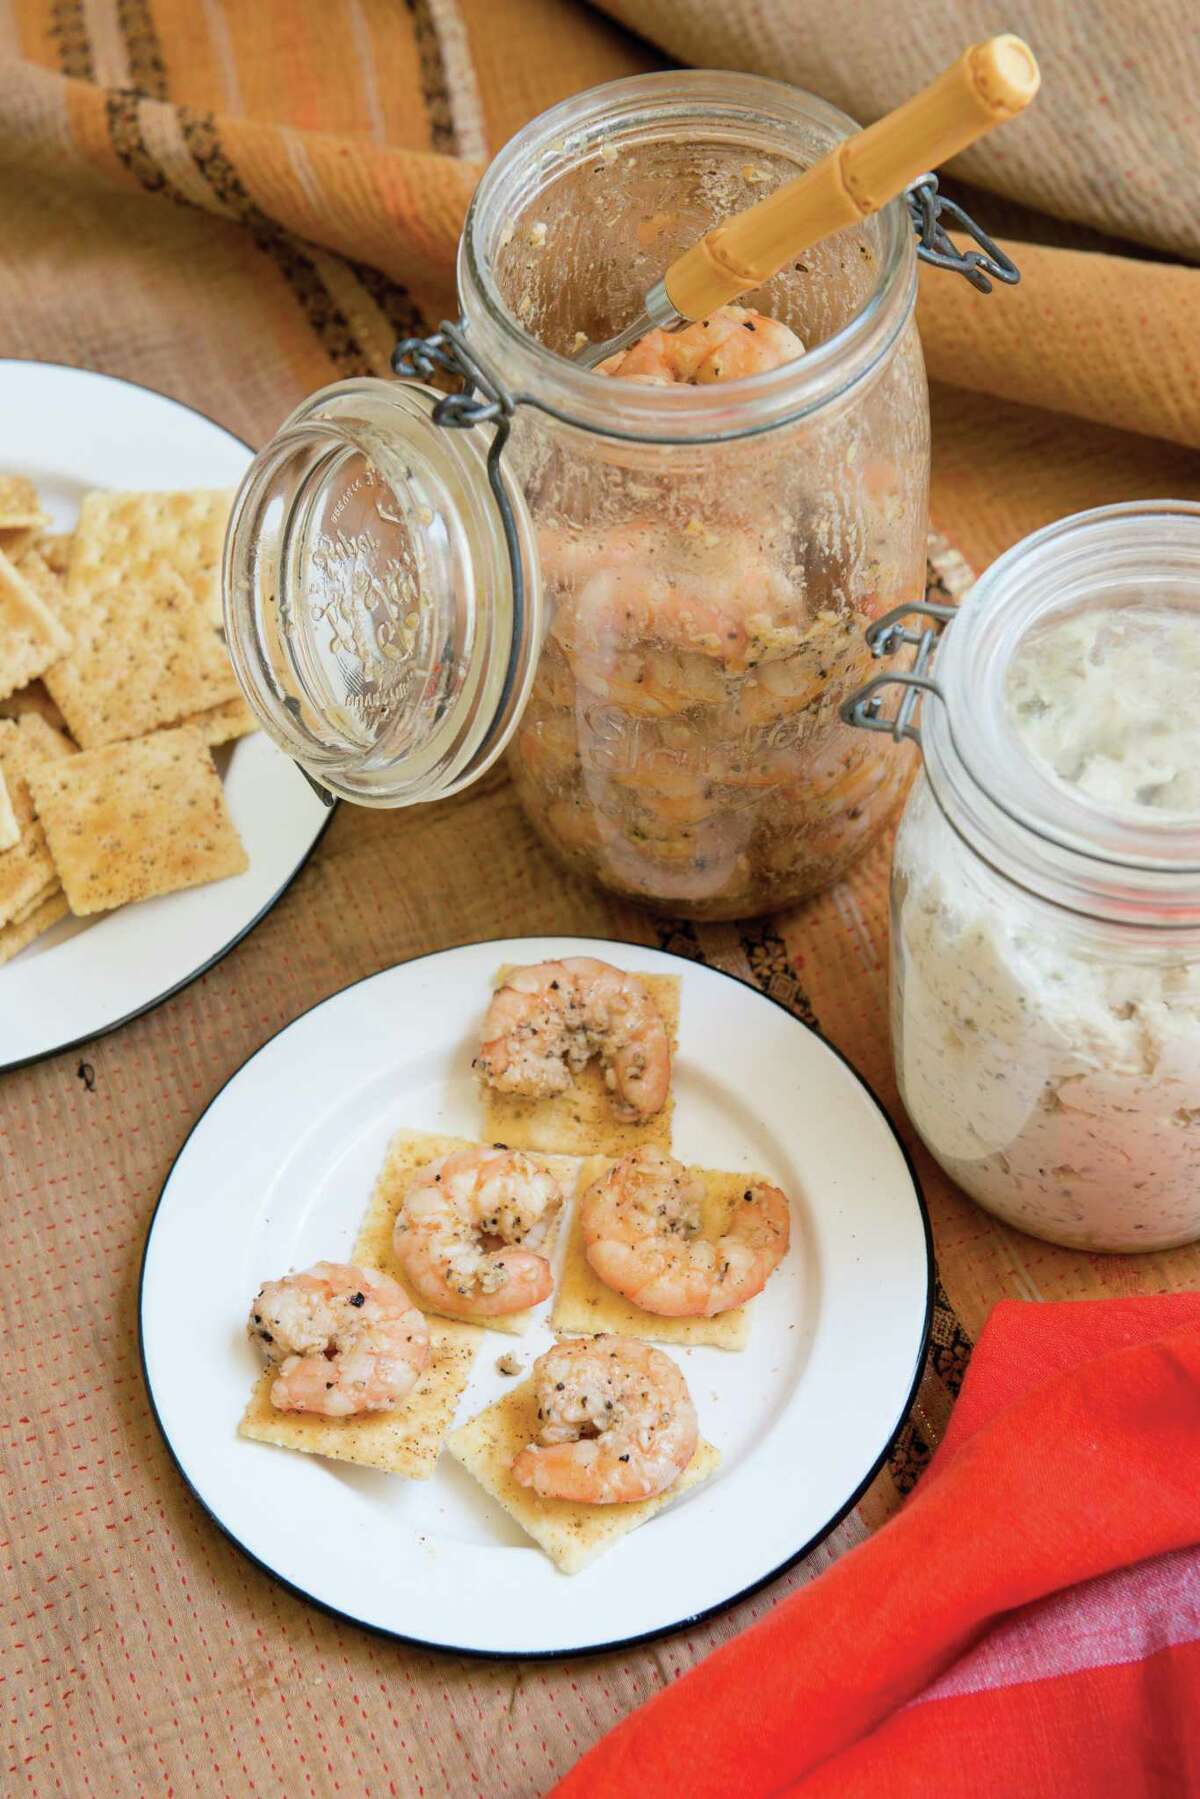 Marinated Shrimp served with Baked Saltines is among recipes included in "Julia Reed's South: Spirited Entertaining and High-Style Fun All Year Long" by Julia Reed (Rizzoli, $50).